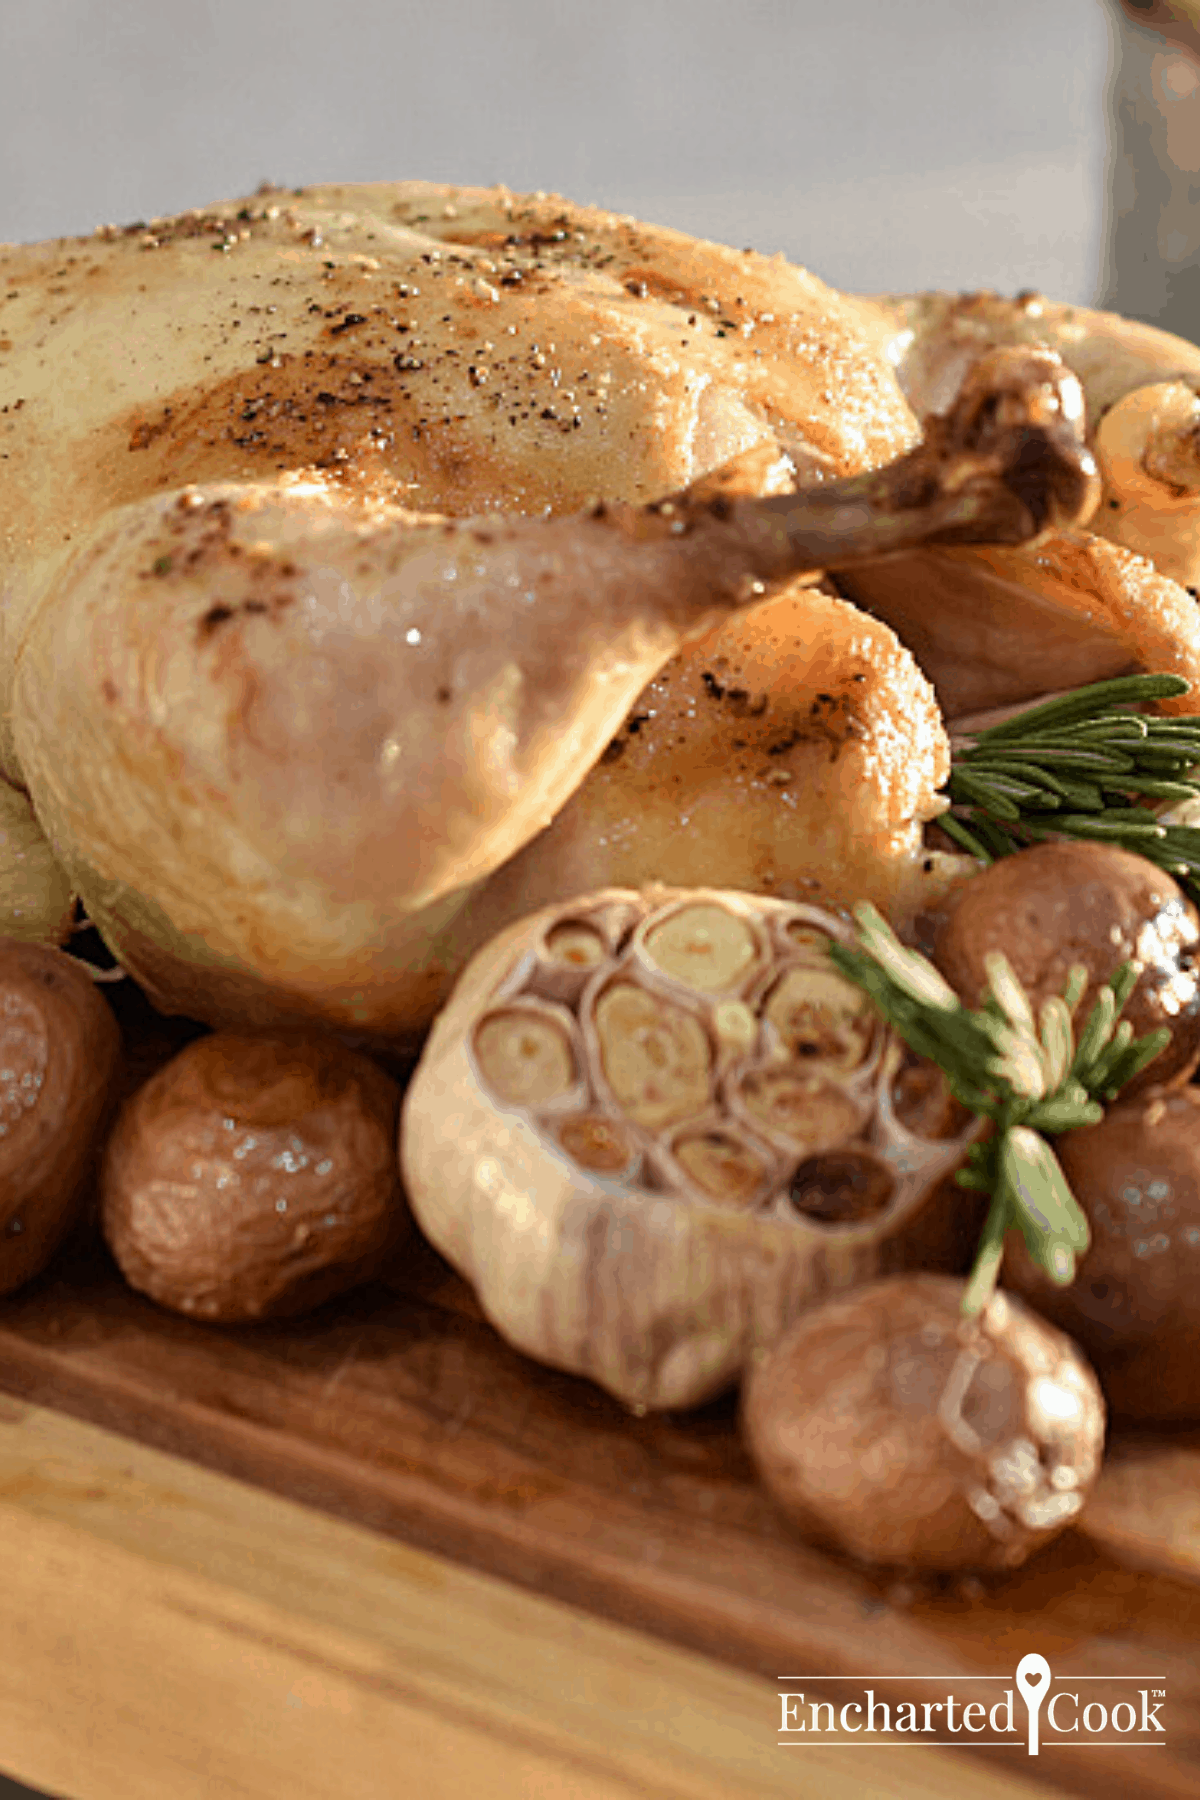 Side view of a golden roasted chicken with roasted garlic and small red potatoes..